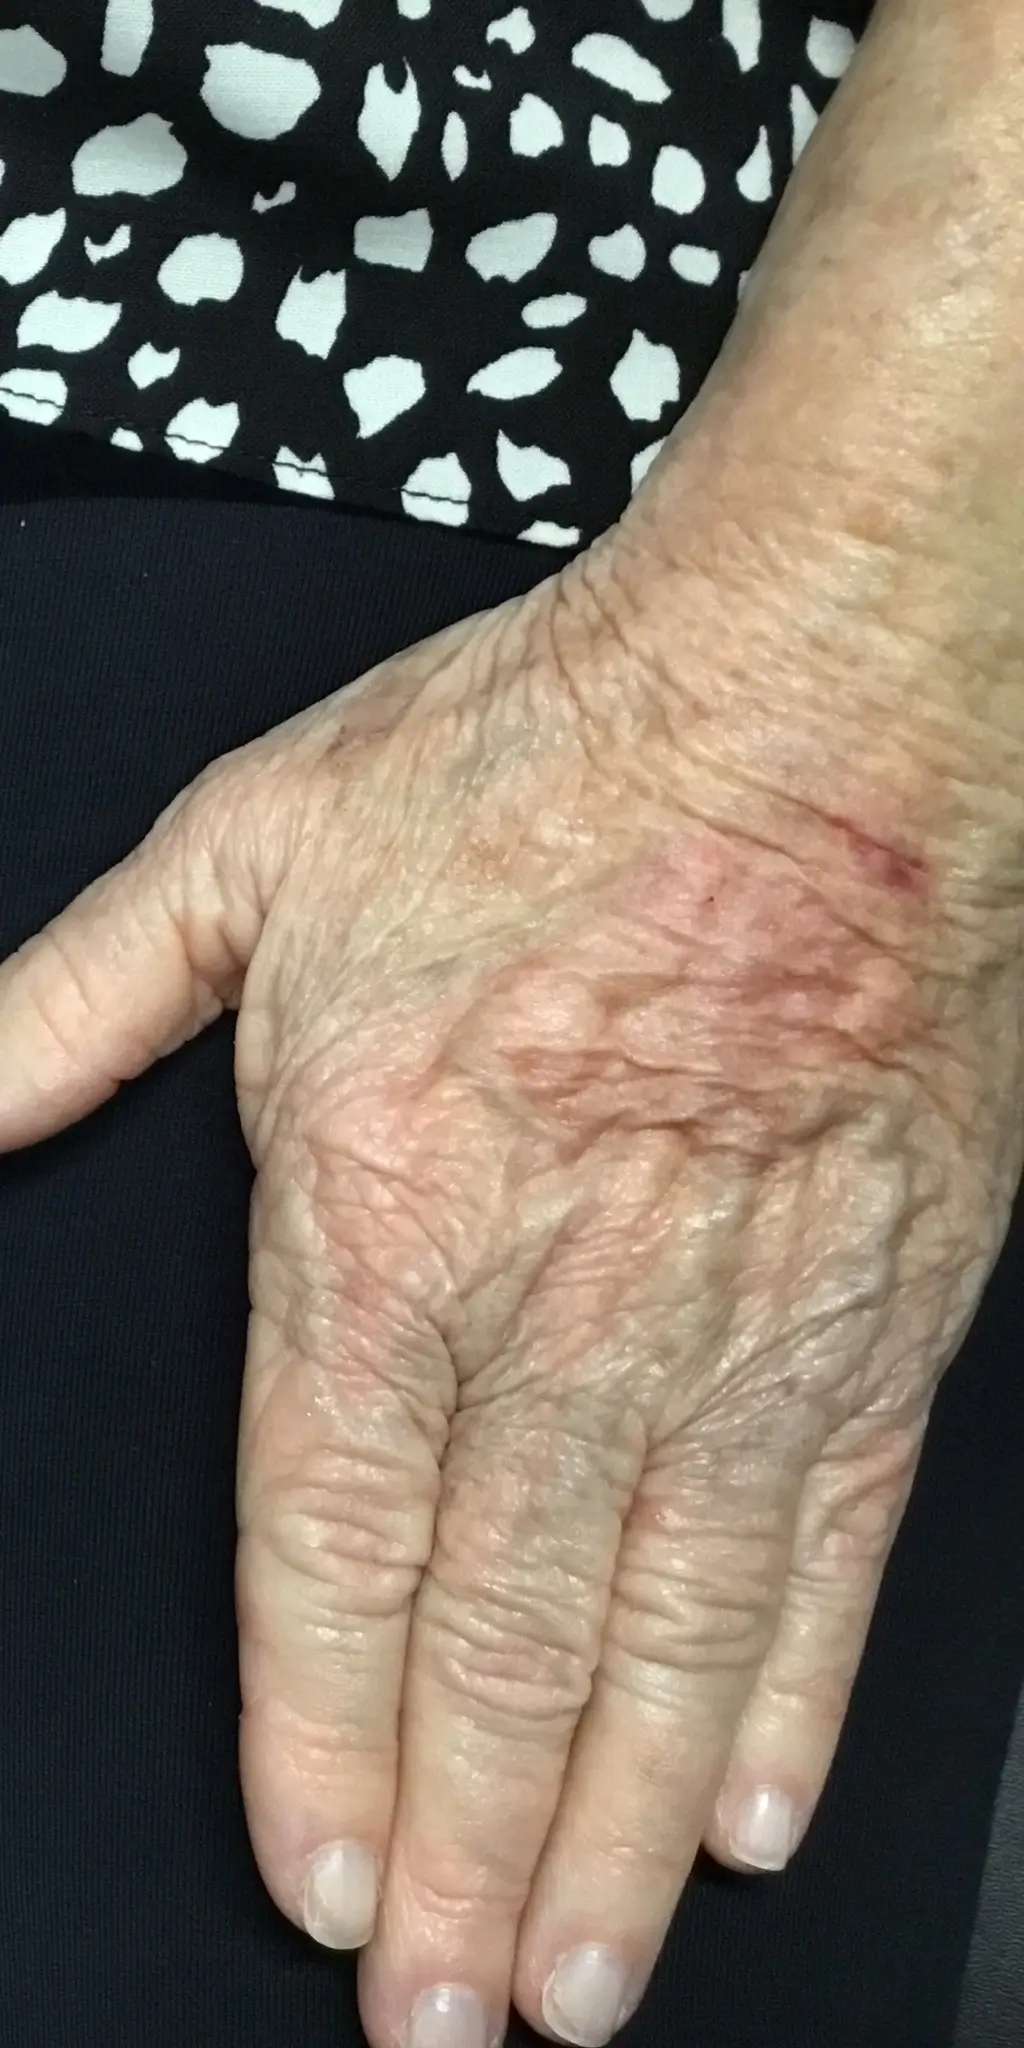 A close-up photograph showcasing aging brown spots on a hand before receiving skin treatment at Morpheus Medical Aesthetics, located in Santa Rosa.